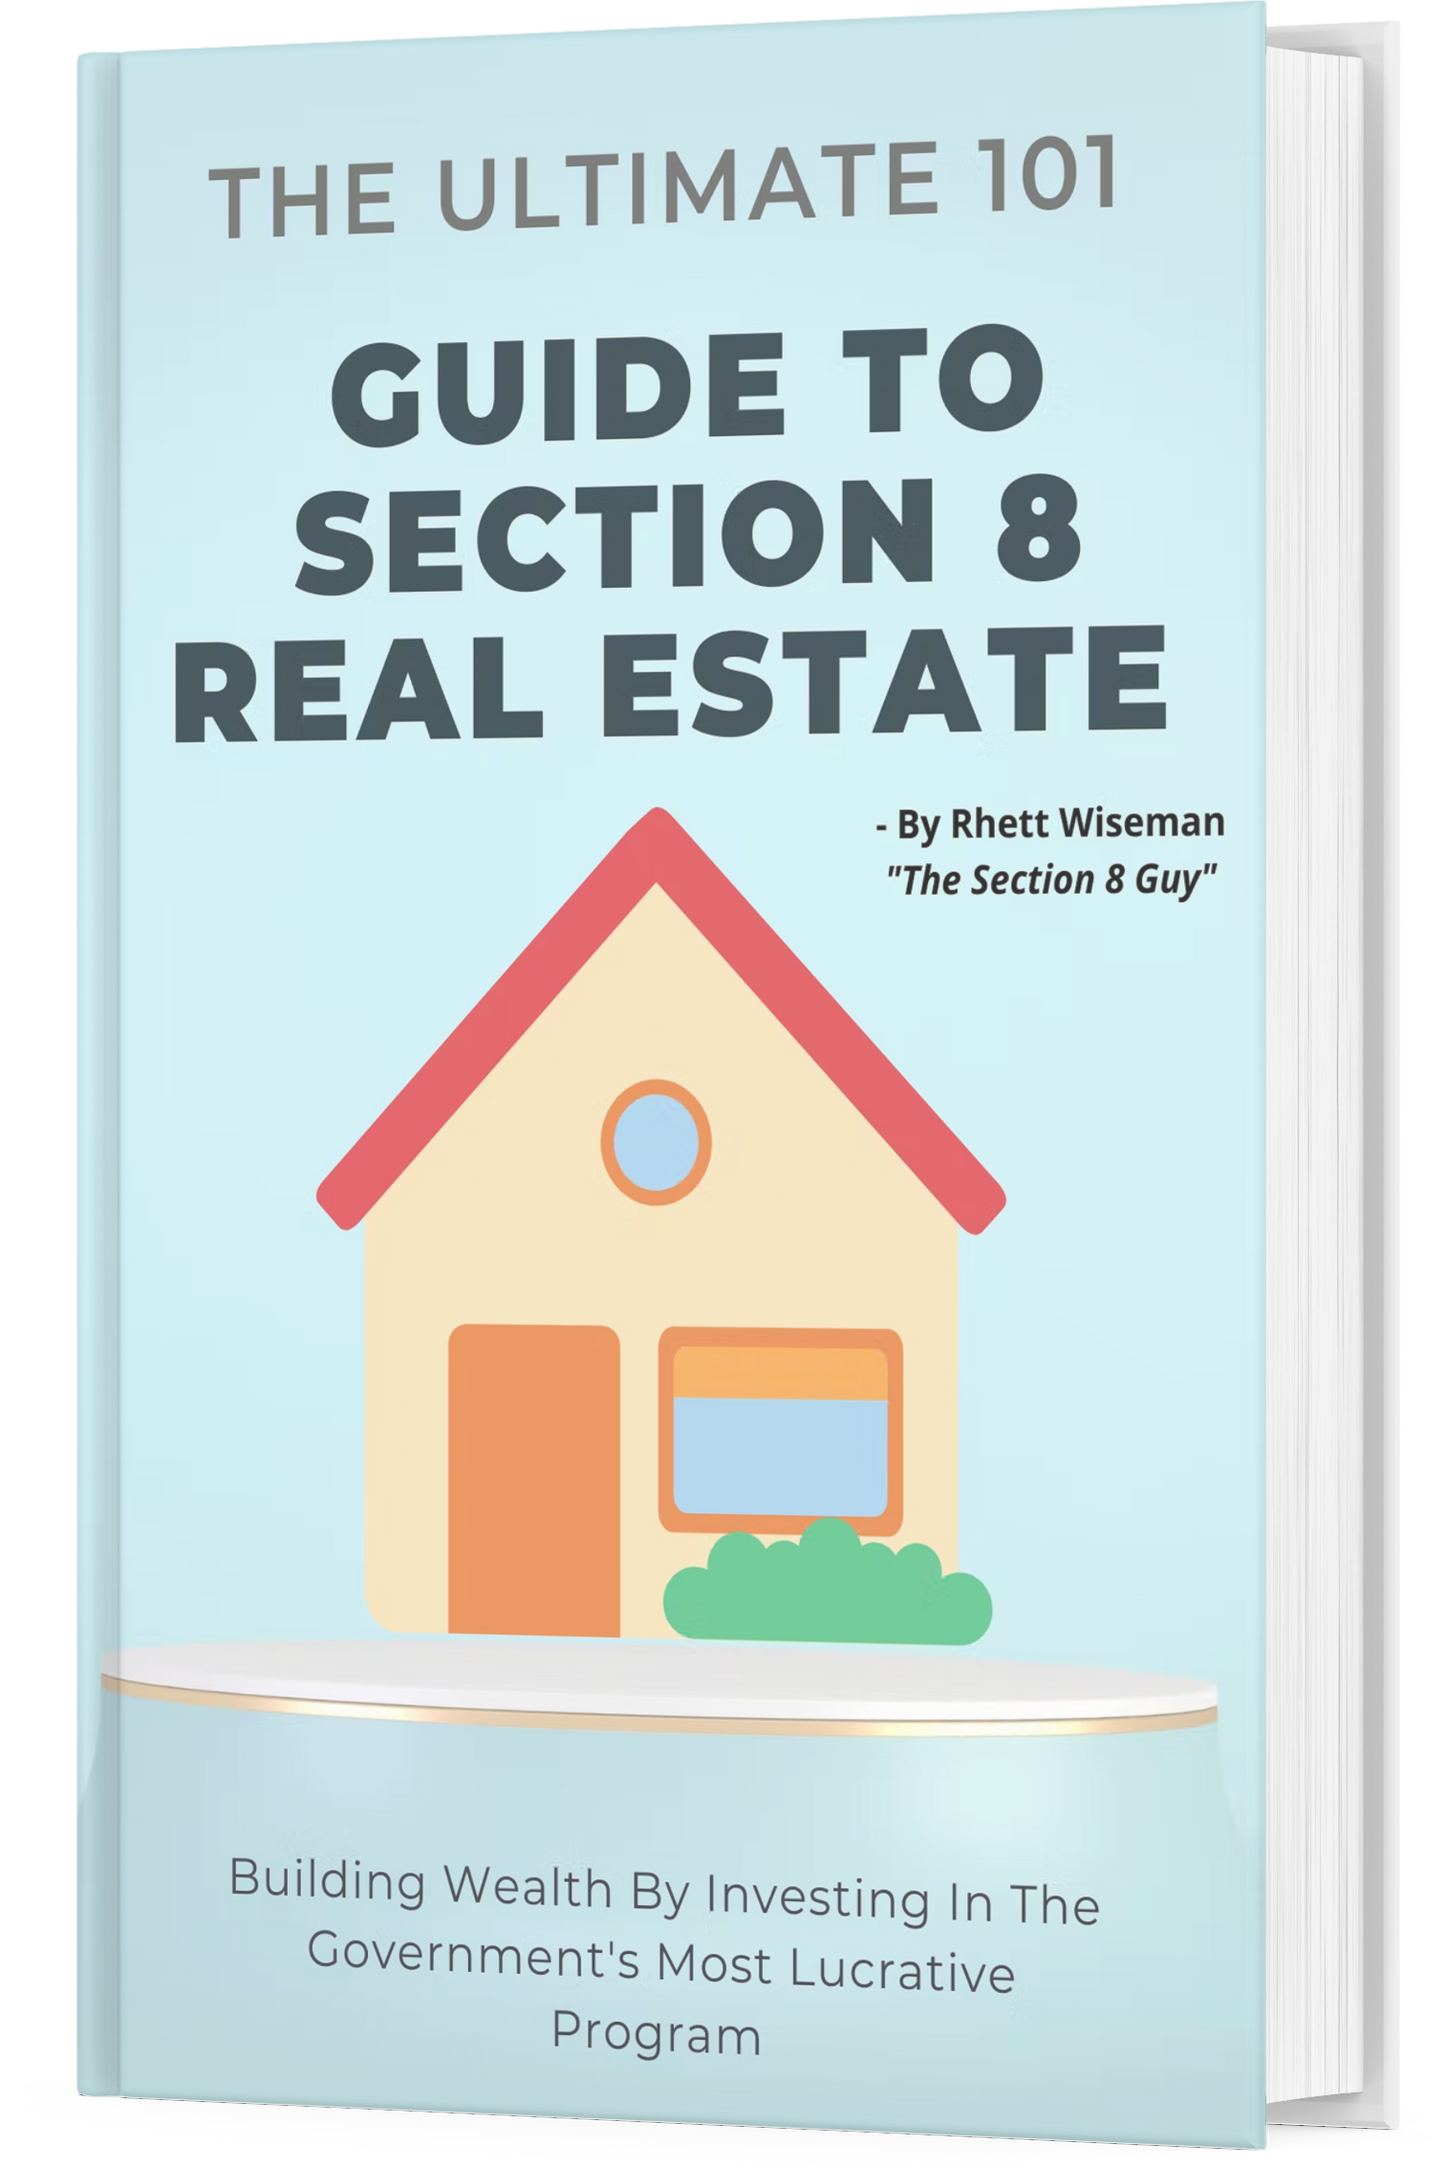 AUDIOBOOK: The Ultimate 101 Guide To Section 8 Real Estate AUDIOBOOK